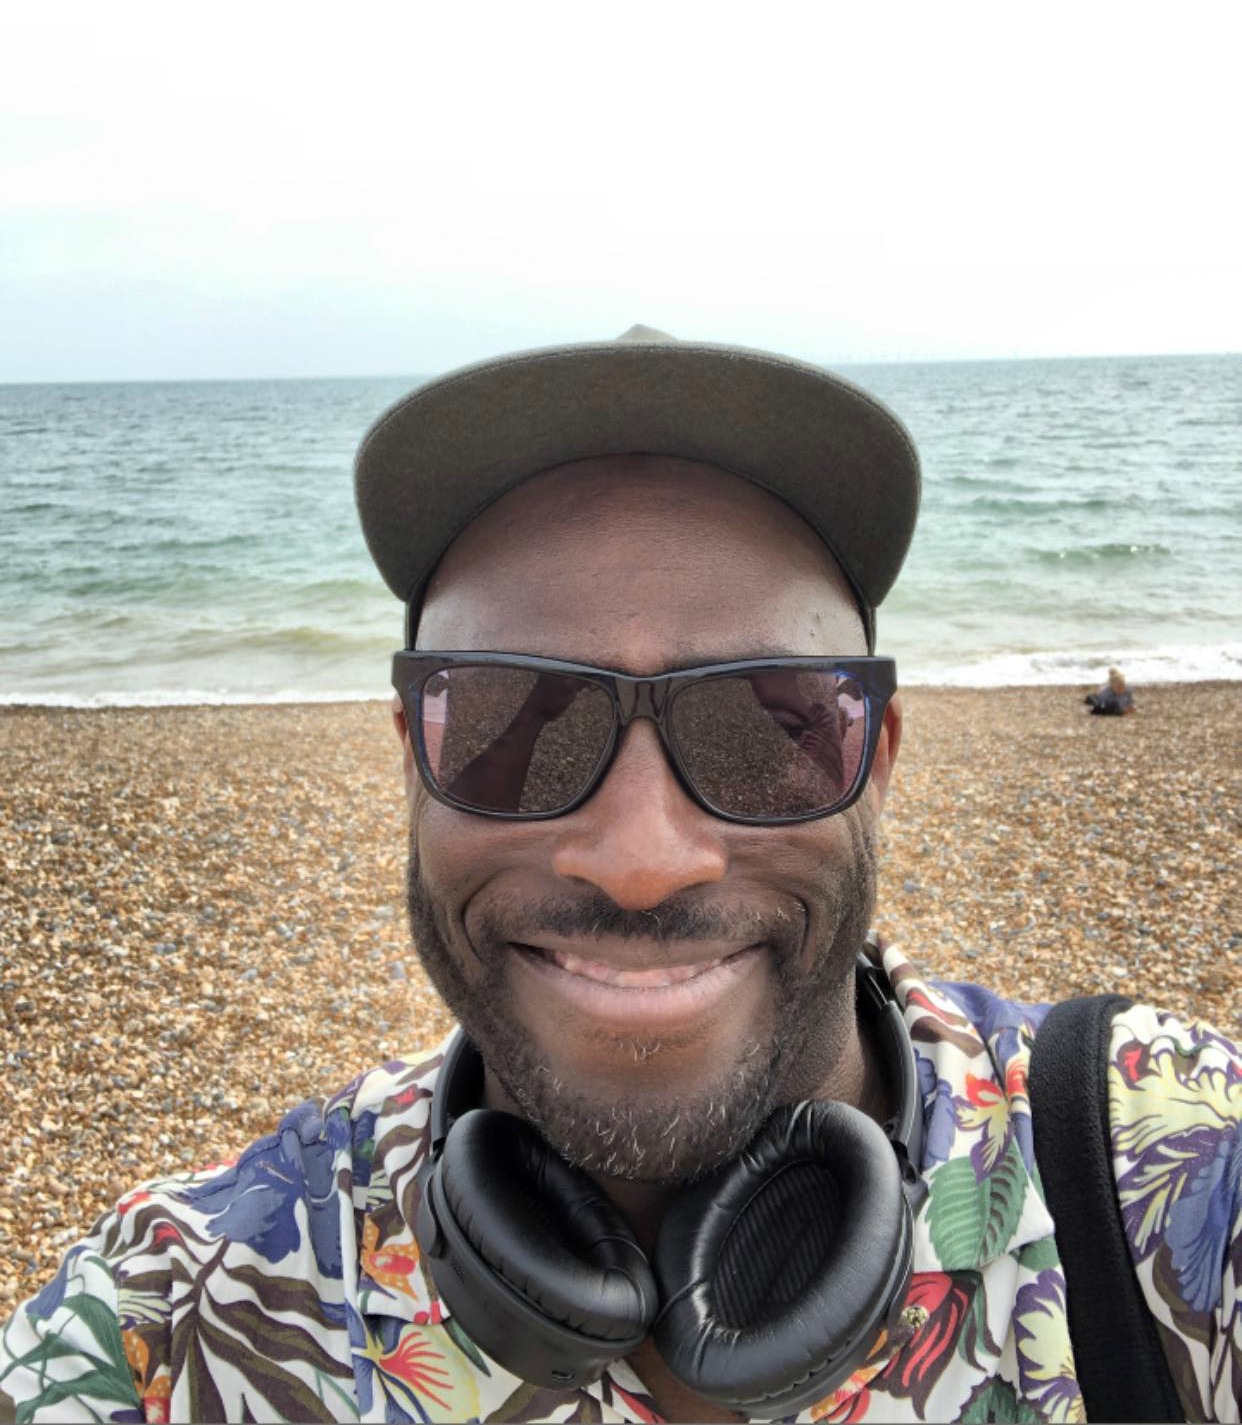 Mike Gayle with headphones at the beach